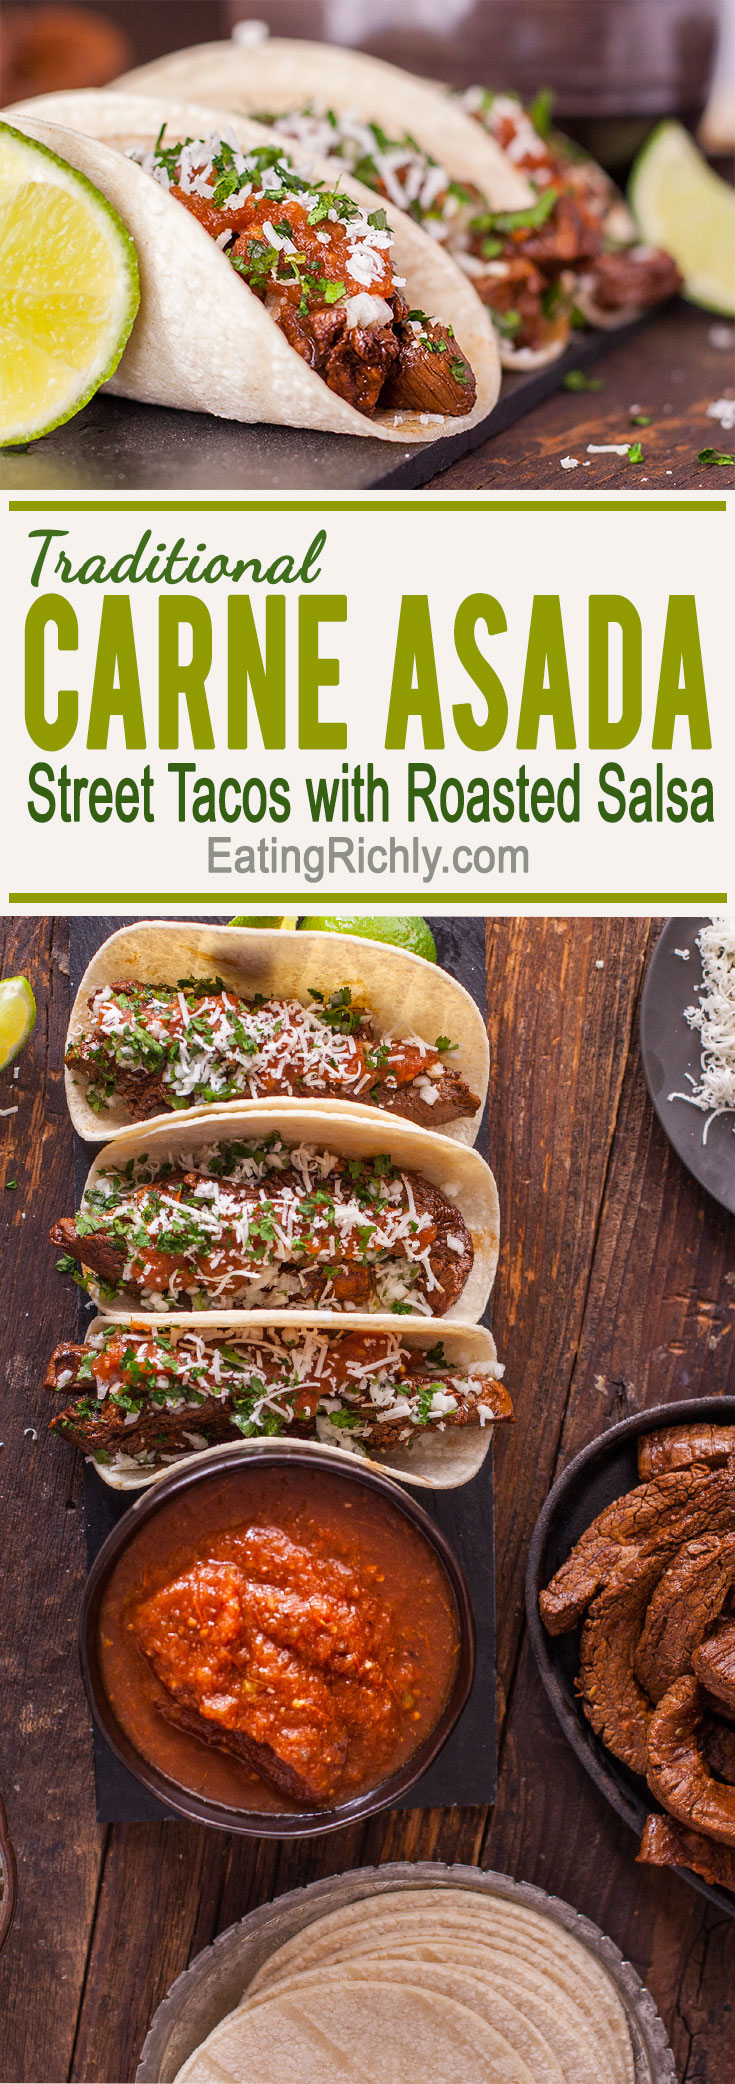 Take your taste buds to Mexico with a traditional taco recipe of flavorful steak topped with a fresh onion relish, & drizzled with spicy homemade salsa. Bet you can't eat just one! From EatingRichly.com